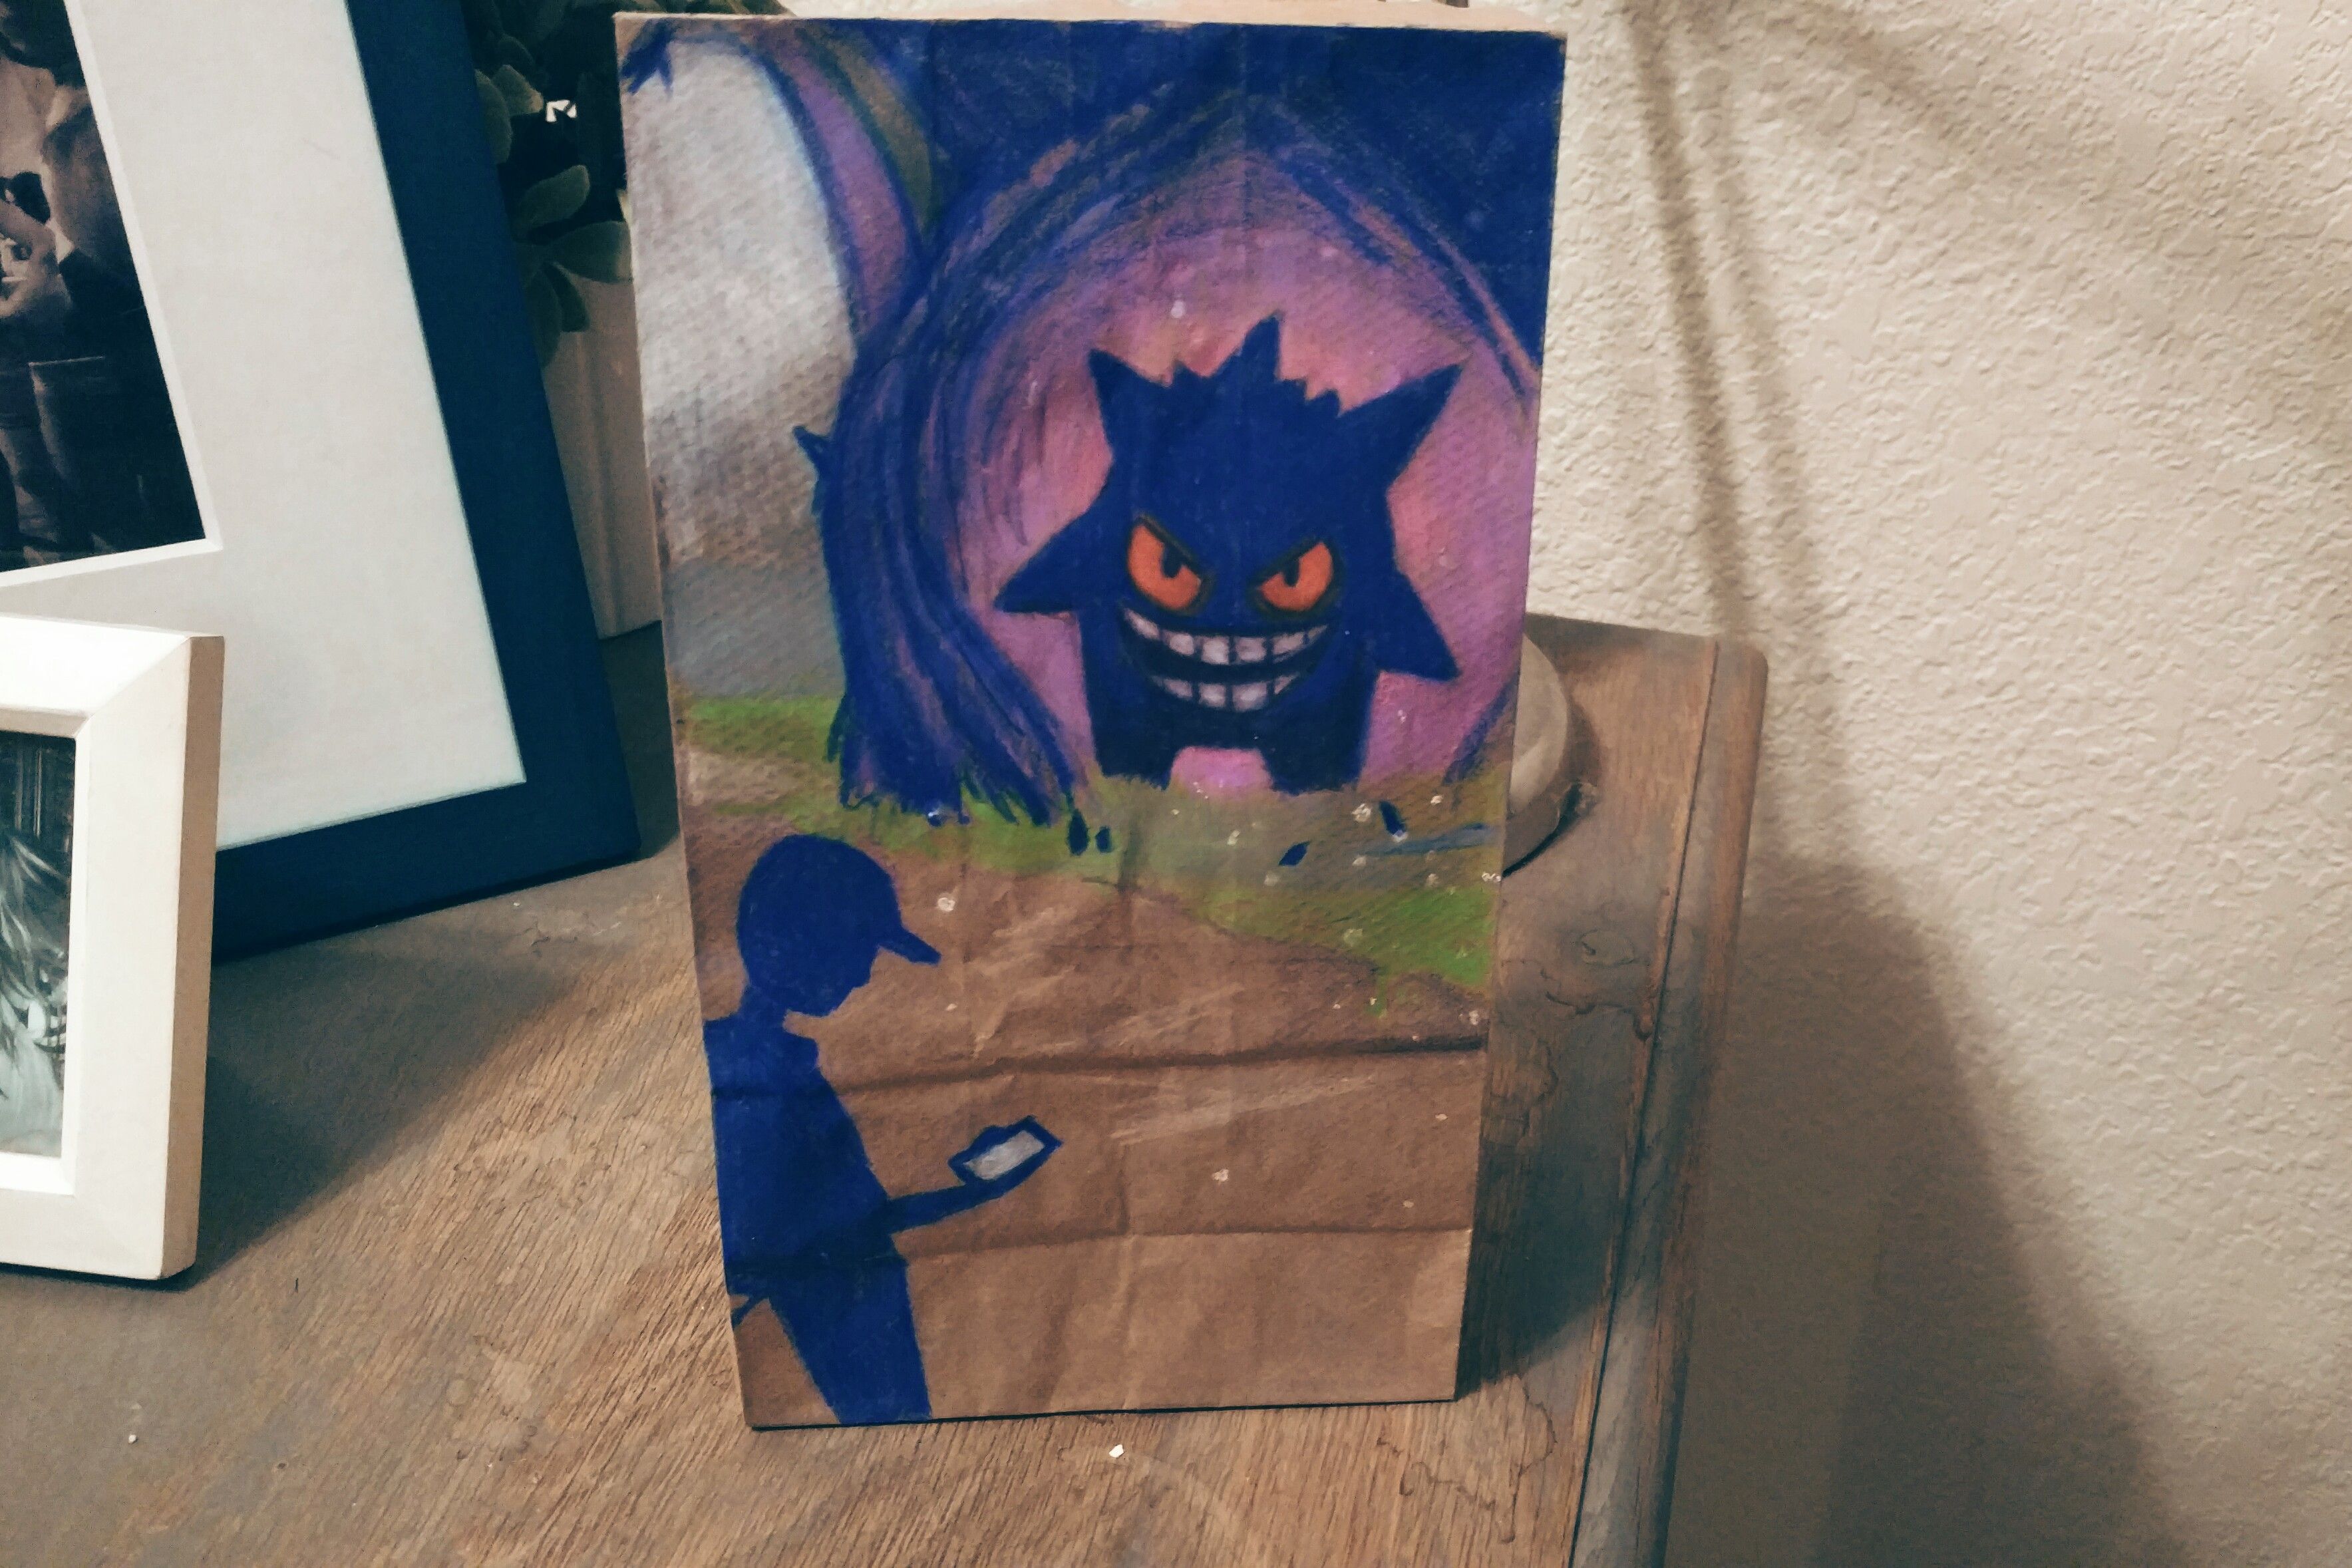 Field trip for my little dude tomorrow, made a Halloween loading screen lunch sack for him.